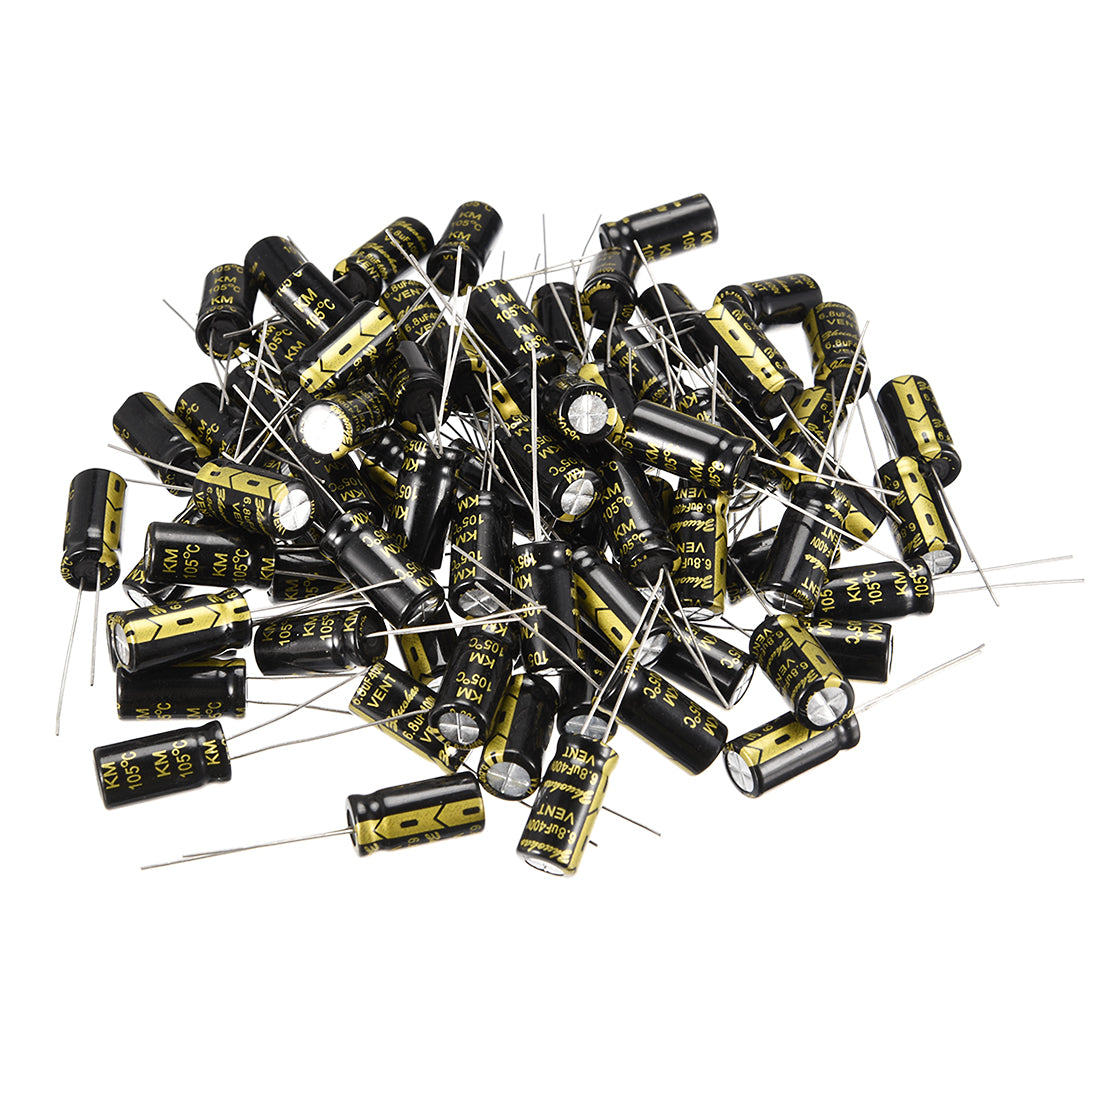 uxcell Uxcell Aluminum Radial Electrolytic Capacitor with 6.8uF 400V 105 Celsius Life 2000H 8 x 16 mm Black 80pcs